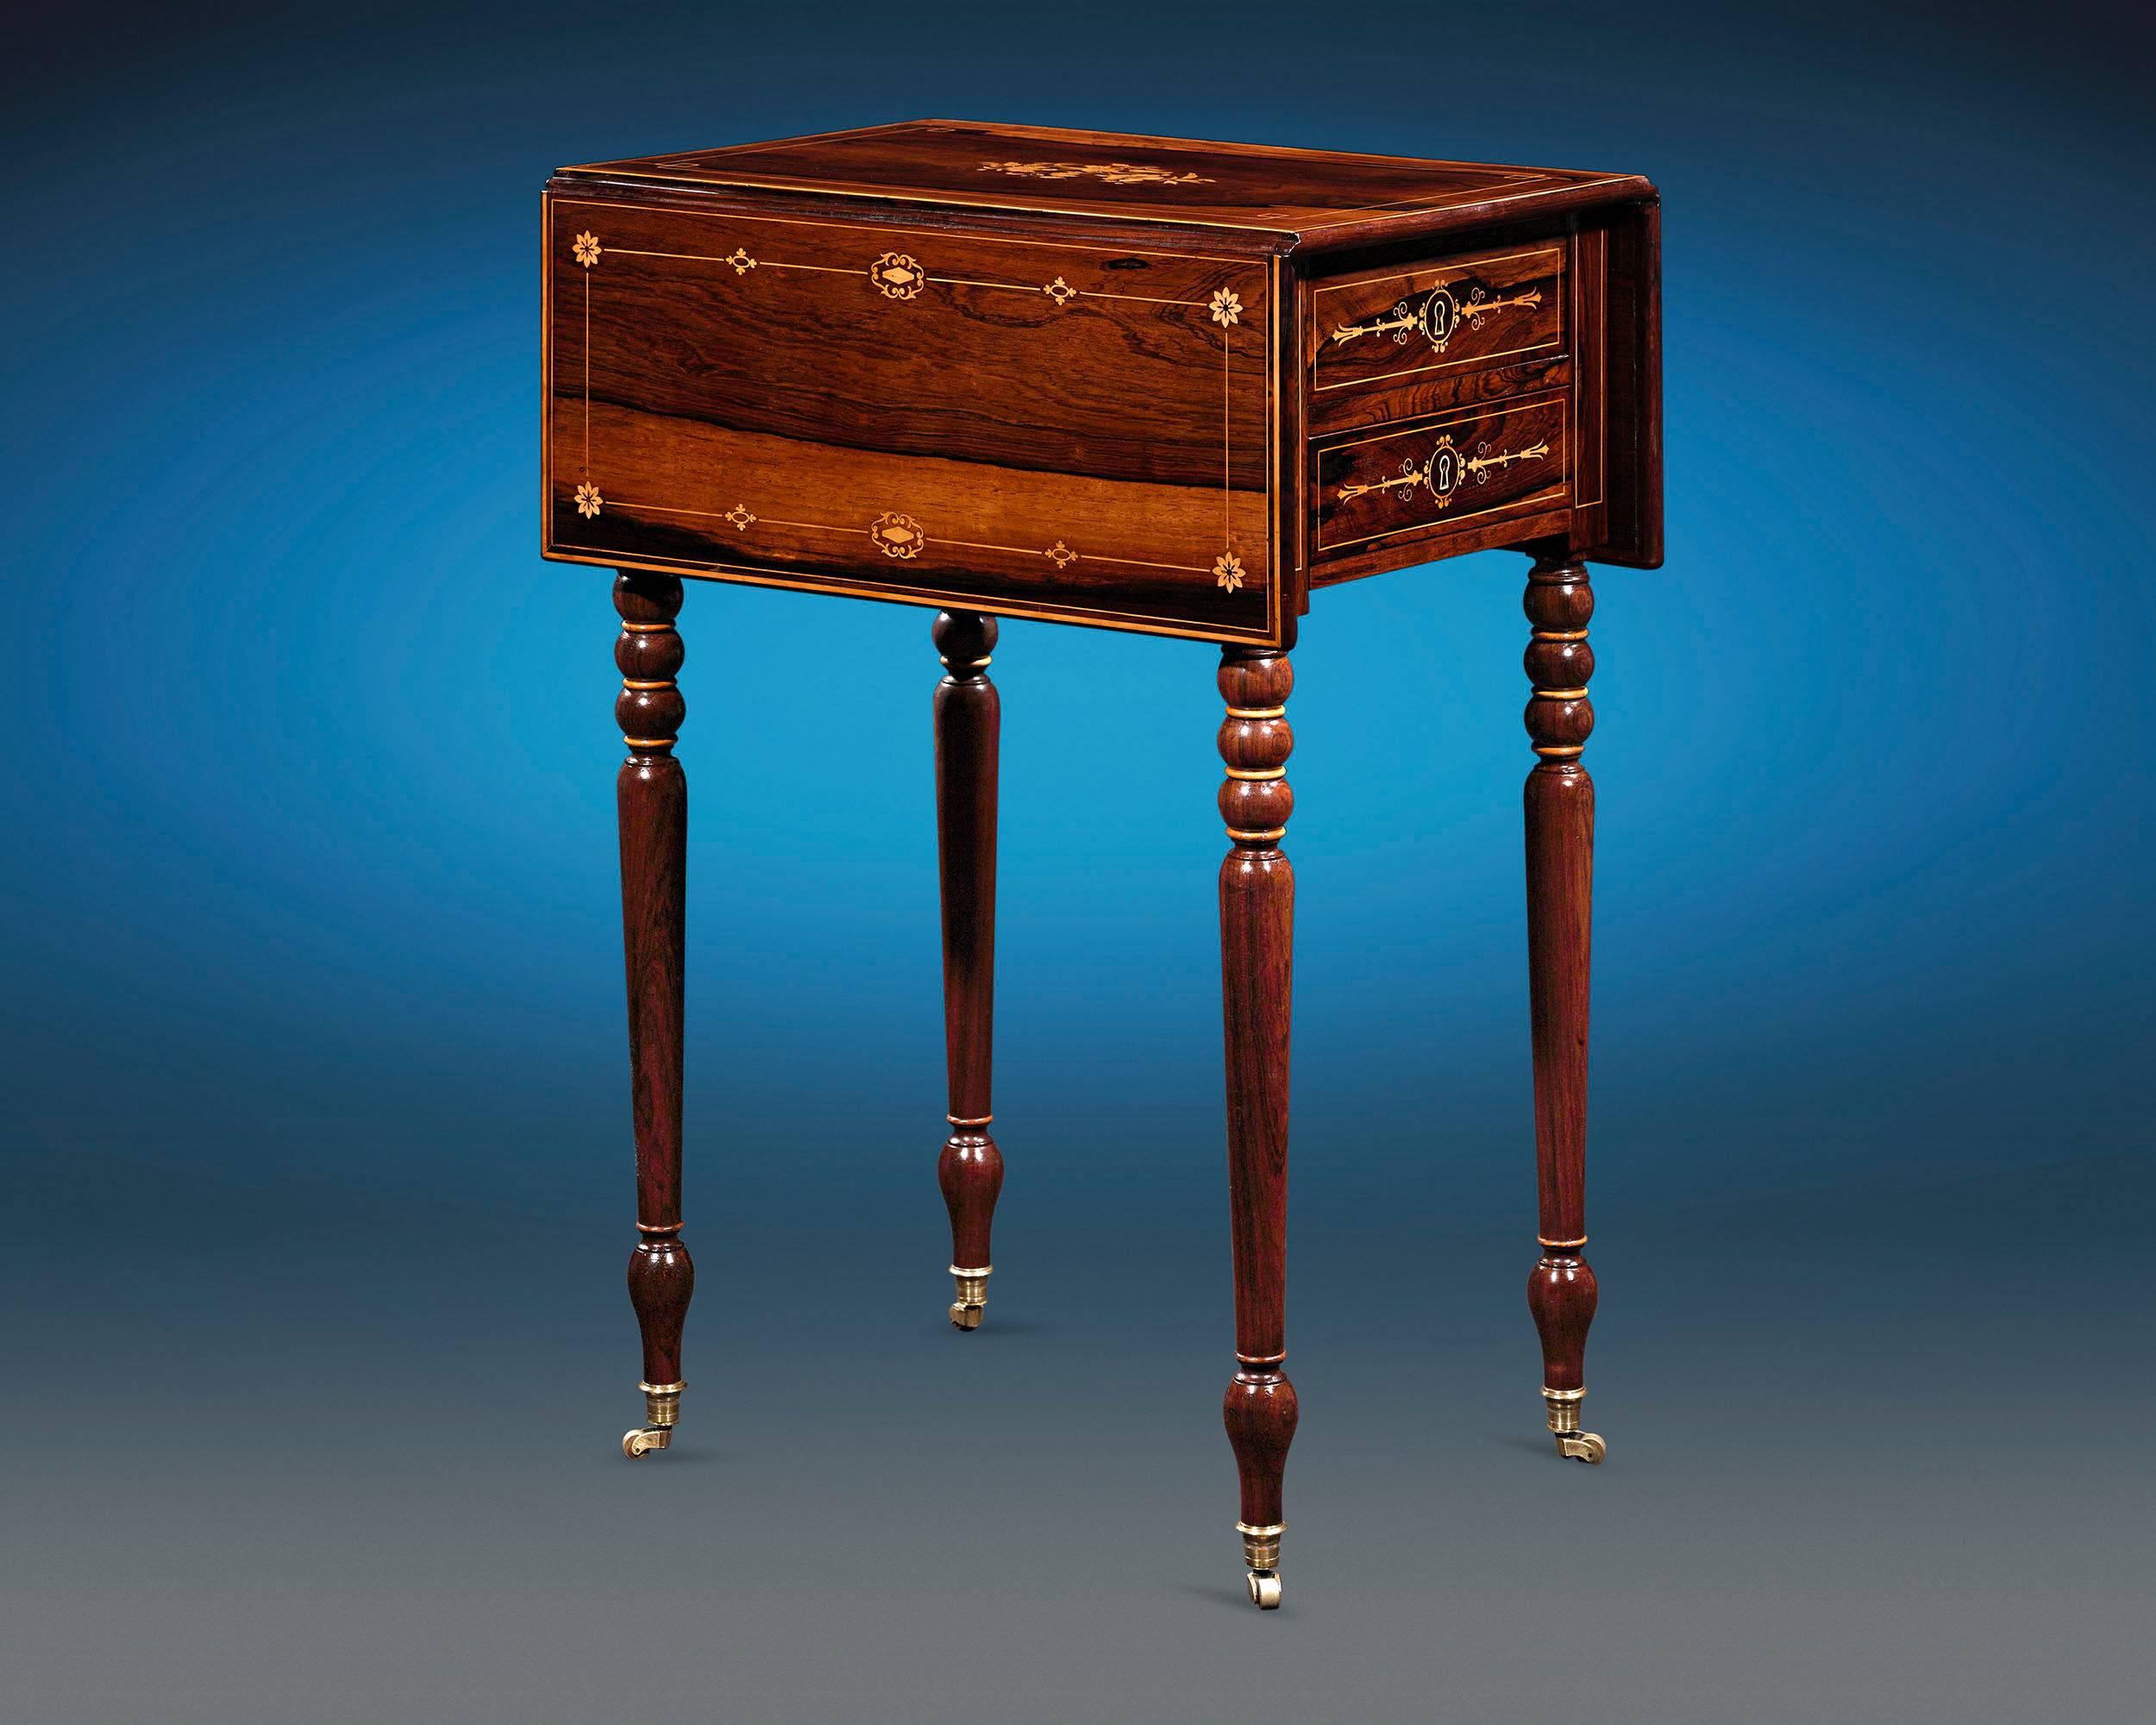 The beautiful marquetry of this French side table exemplifies the artistry and elegance of the Charles X period. Crafted for functionality as well as beauty, the perfectly proportioned table boasts hinged flaps that can be lowered when not in use.